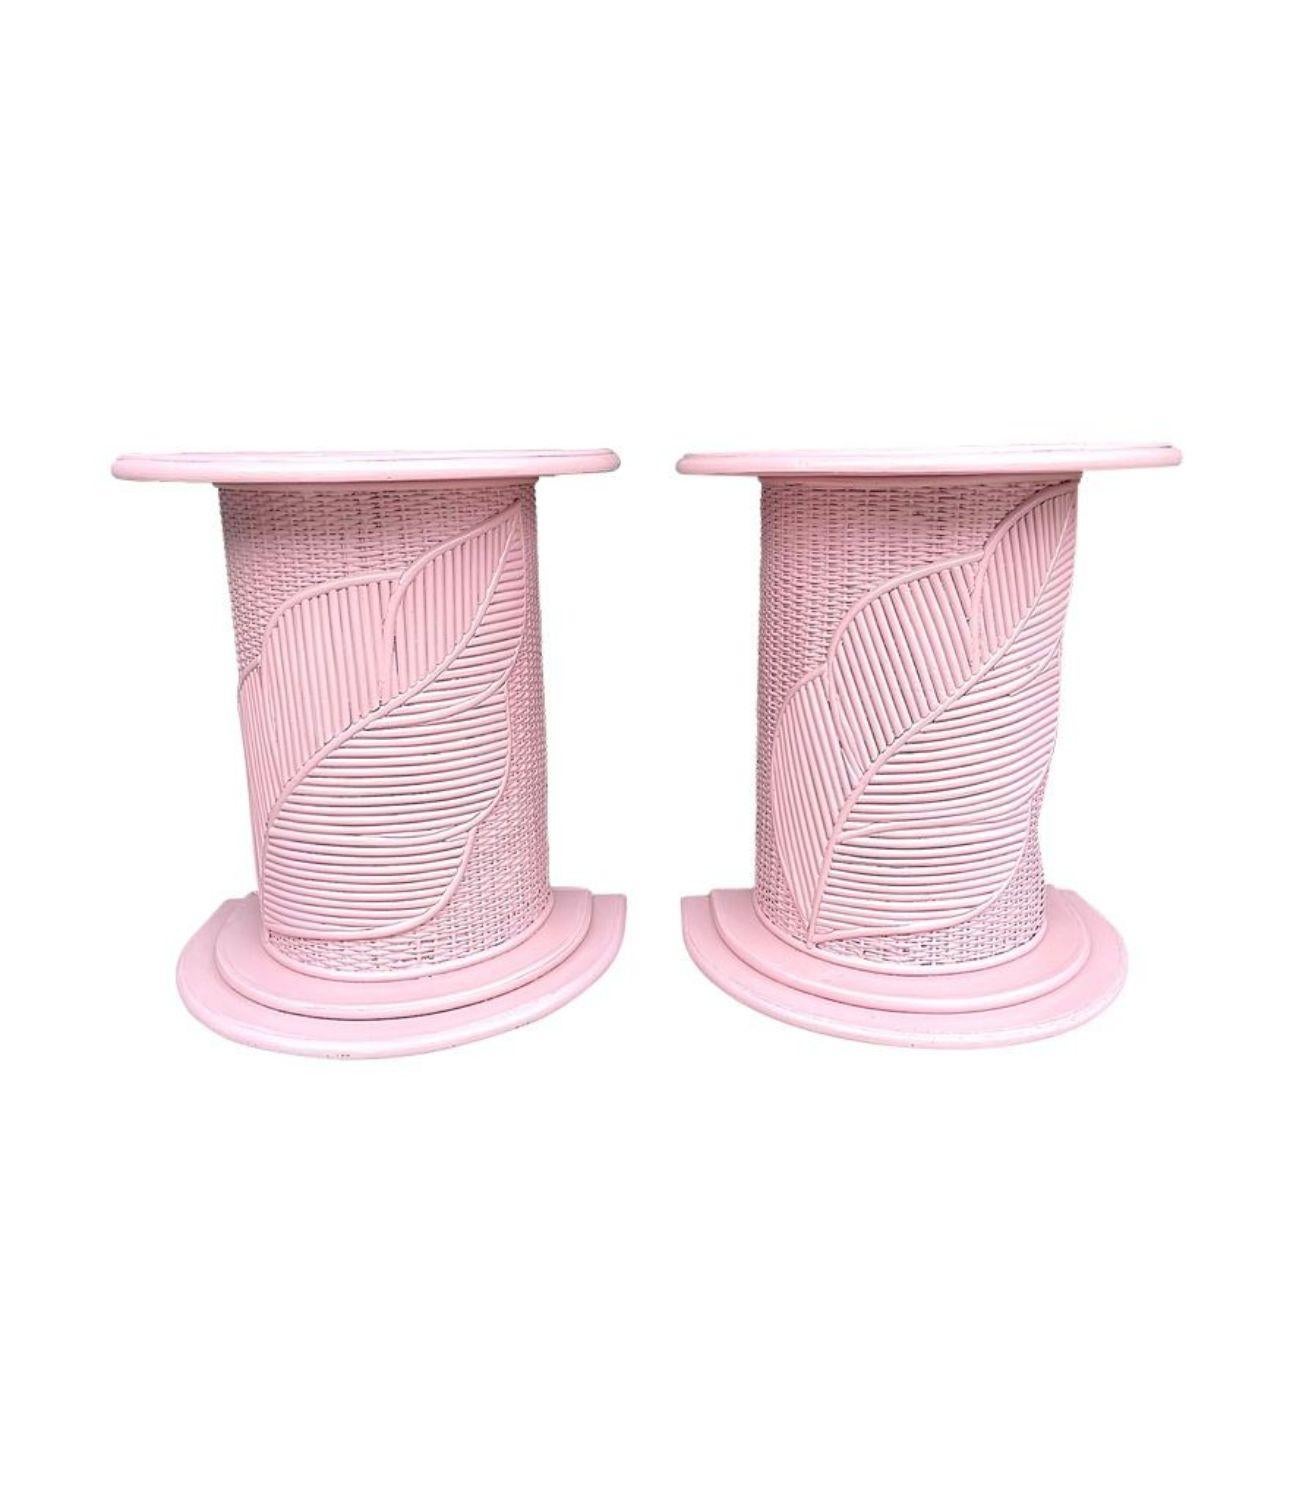 A pair of Italian 1960s dusty pink pencil reed, bamboo side tables / pedestals by Vivai del Sud each with a large leaf designs on the front. The semi circular tables sit well against the wall and could used as bedside tales too.